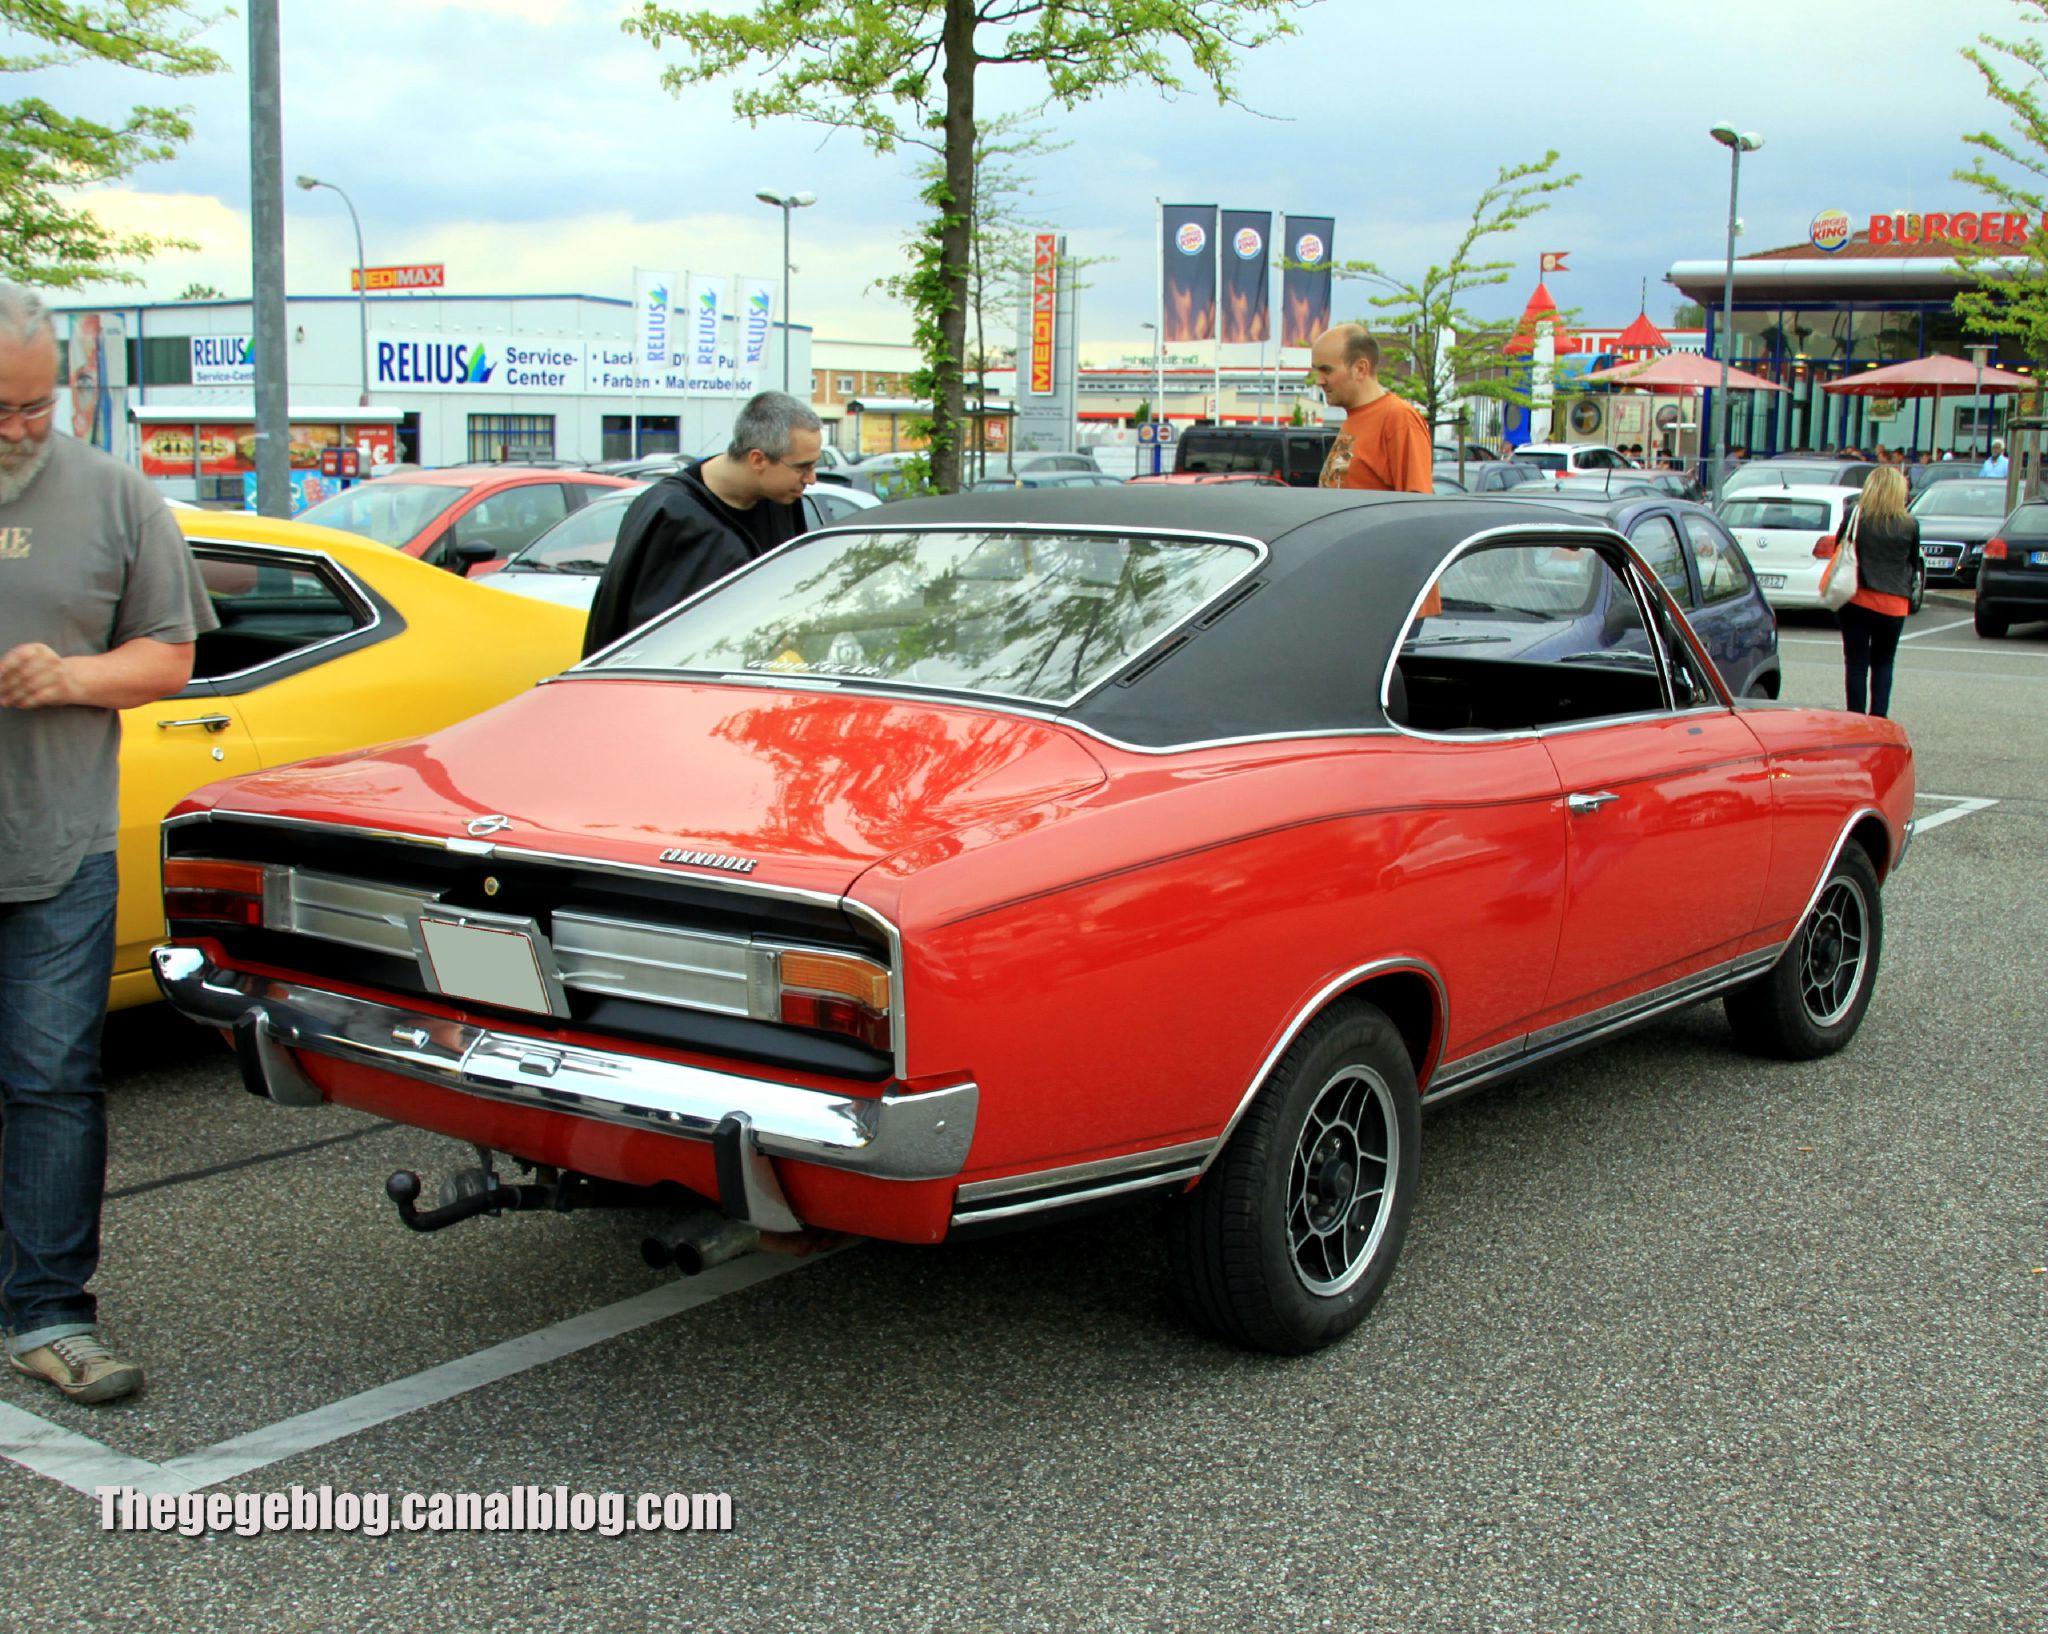 Opel commodore GSE coupÃ© (Rencard Burger King mai 2012) 02